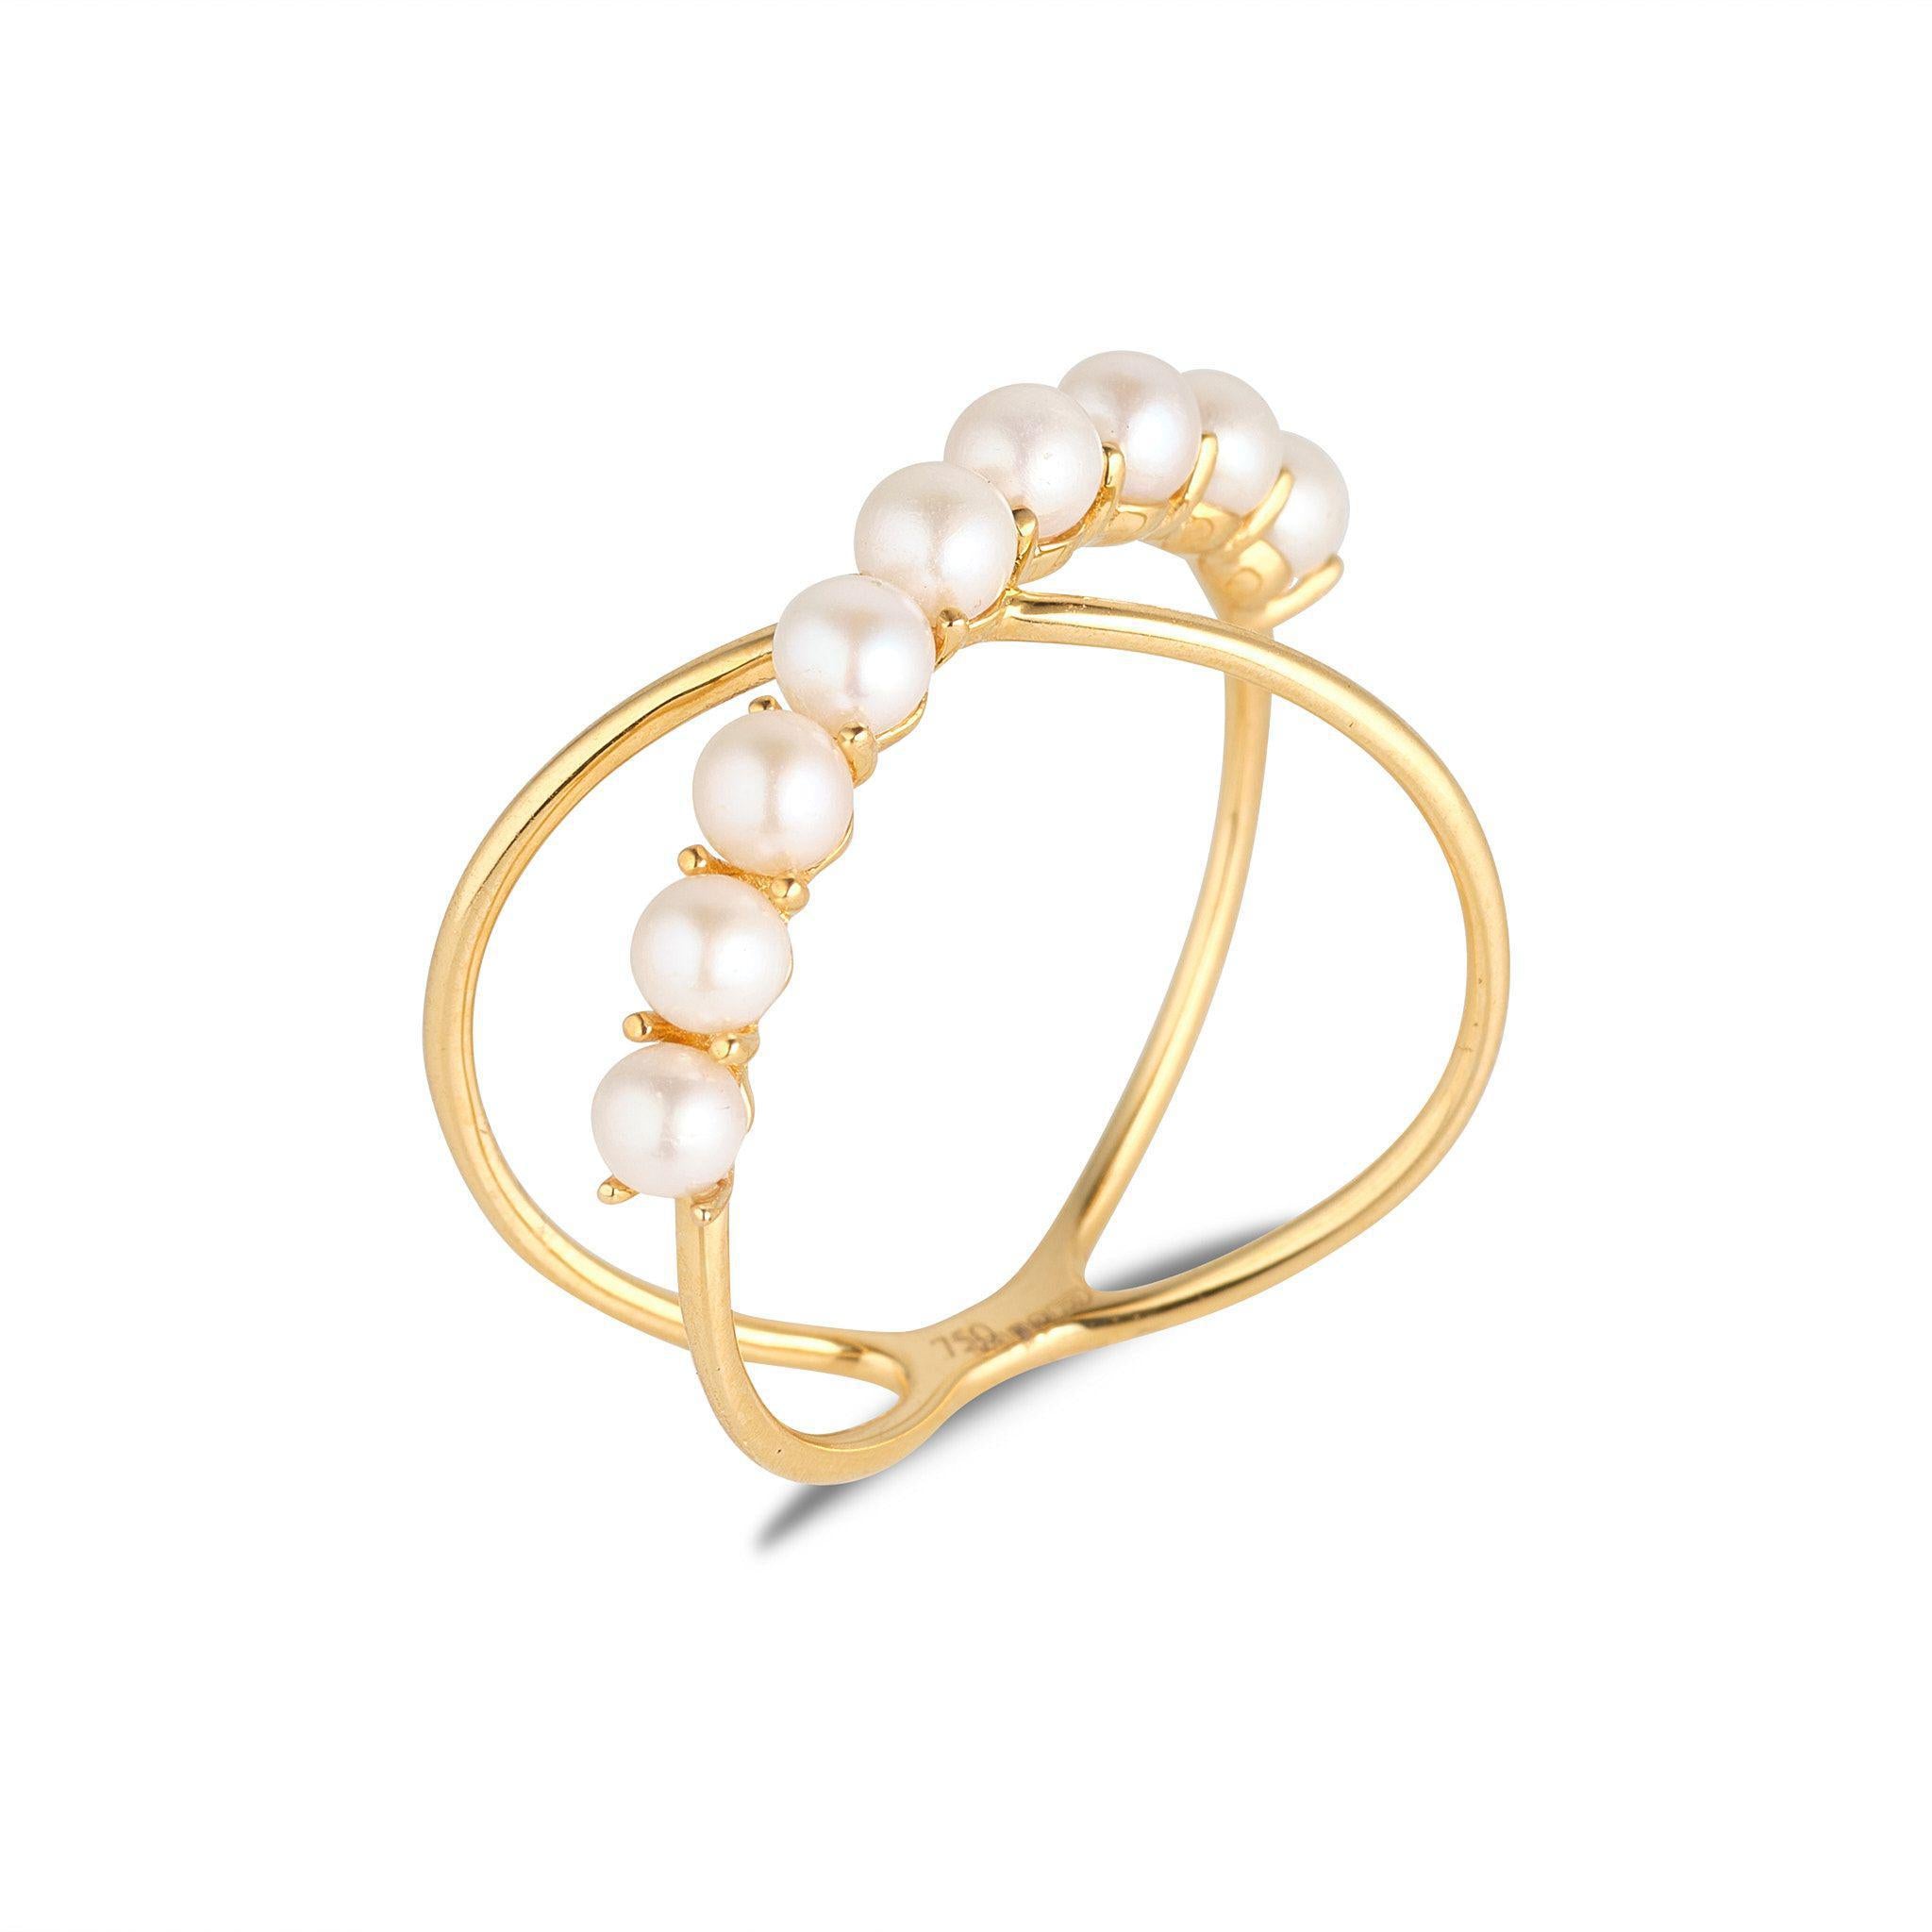 18kt Yellow Gold Ring with 3mm x 9 Round Freshwater Pearls